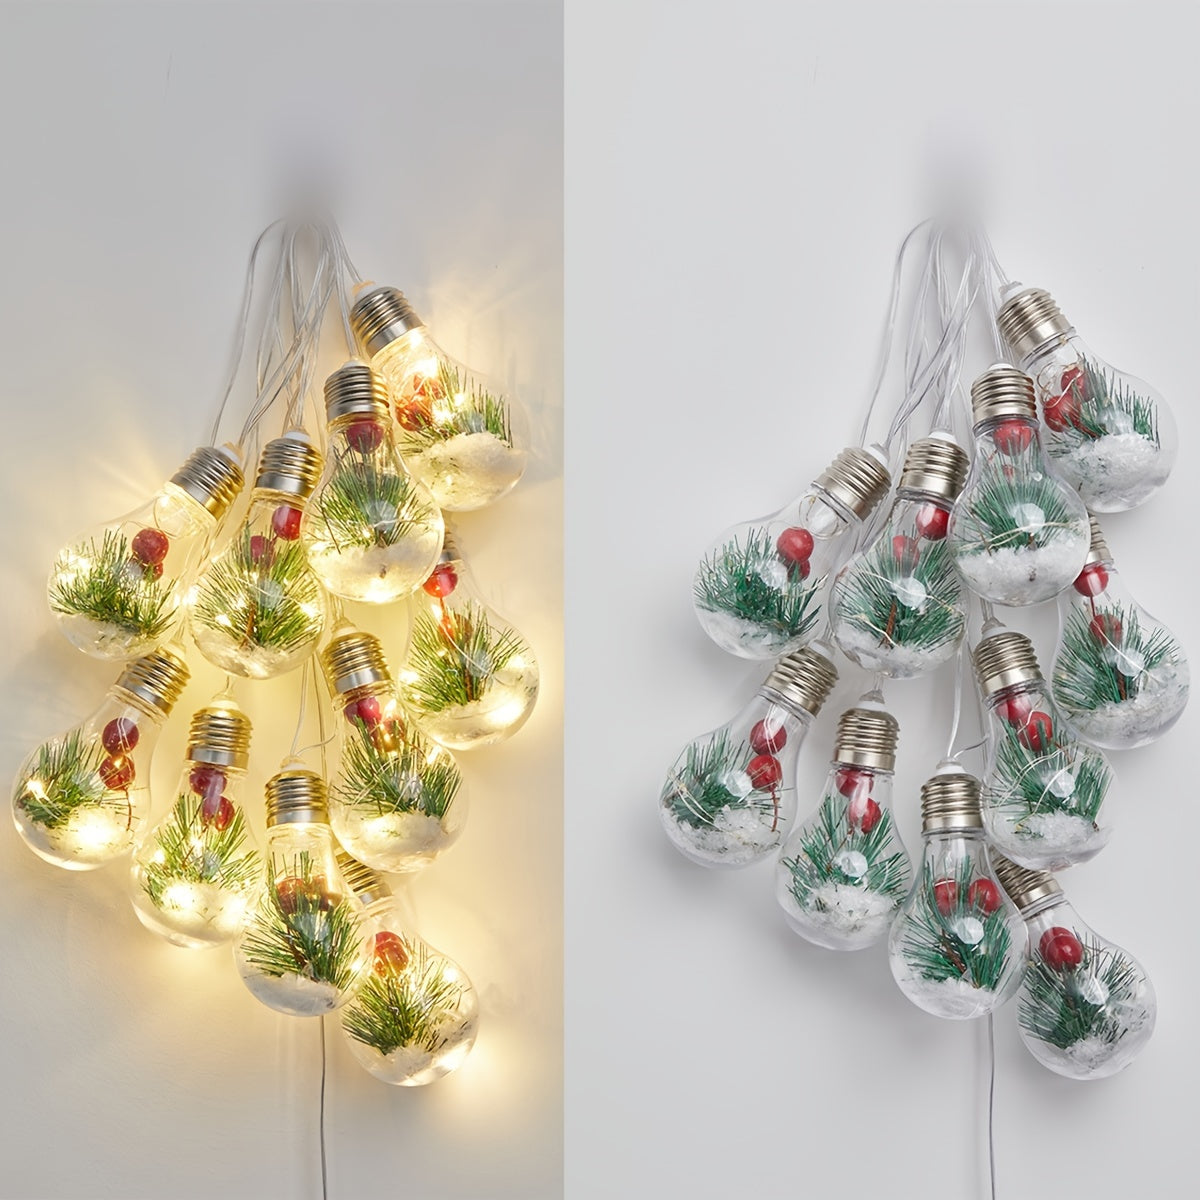 1pc 4M/157.48in 50LED Battery Powered Fairy Lights With 10 Bulbs Warm White IP55 Waterproof Copper Wire String Lamp For Christmas Wedding Party Home Bedroom Garden Shop